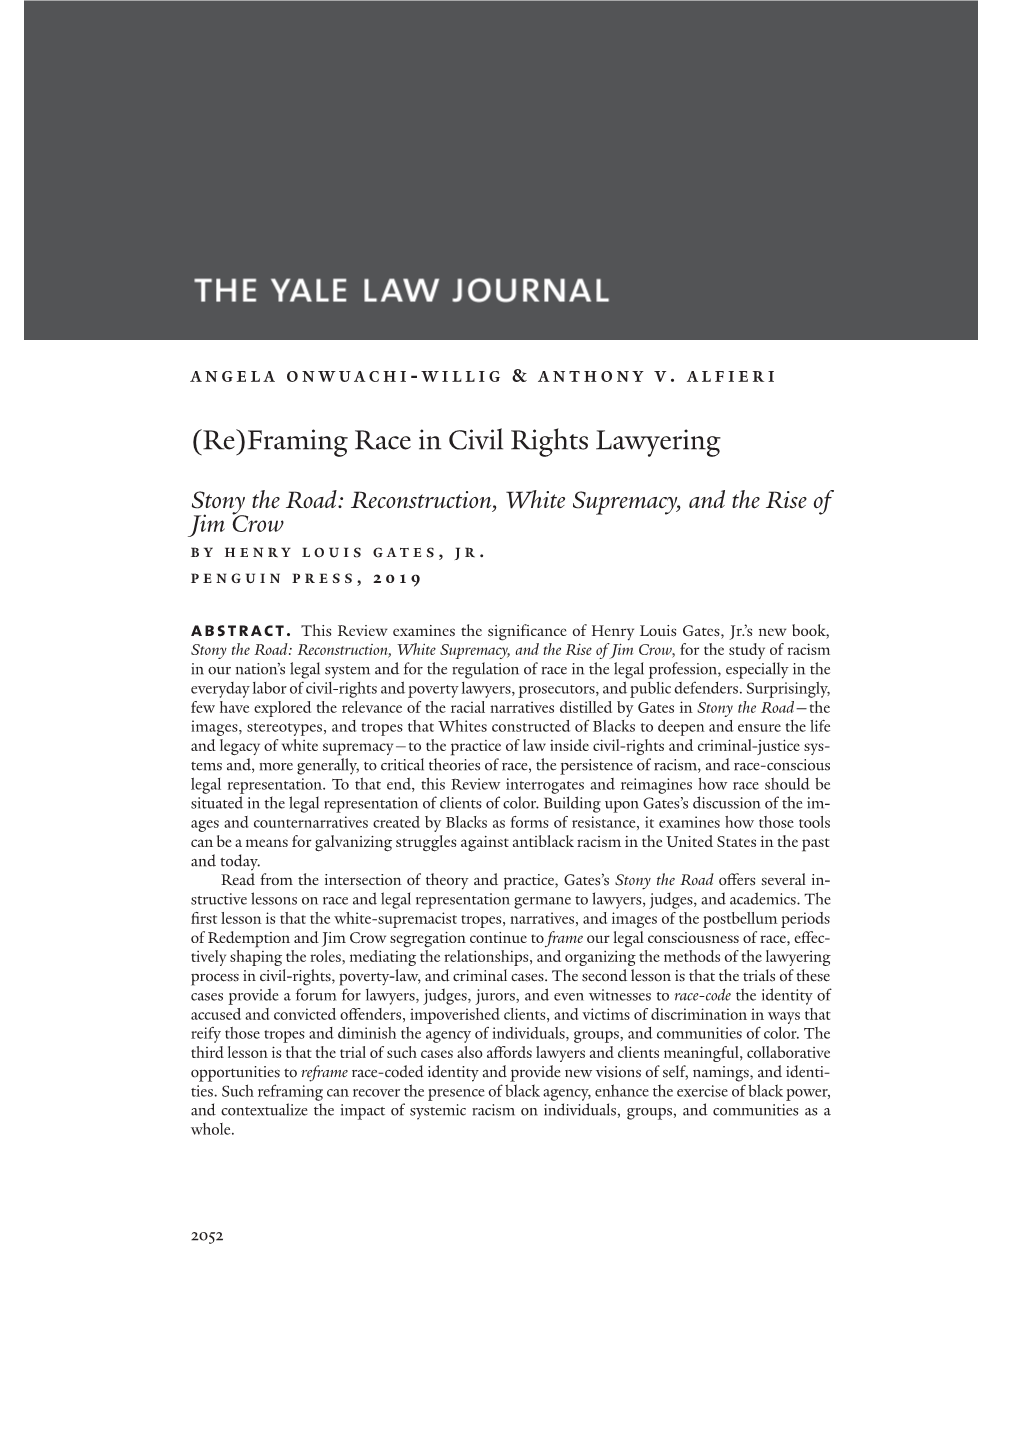 (Re)Framing Race in Civil Rights Lawyering